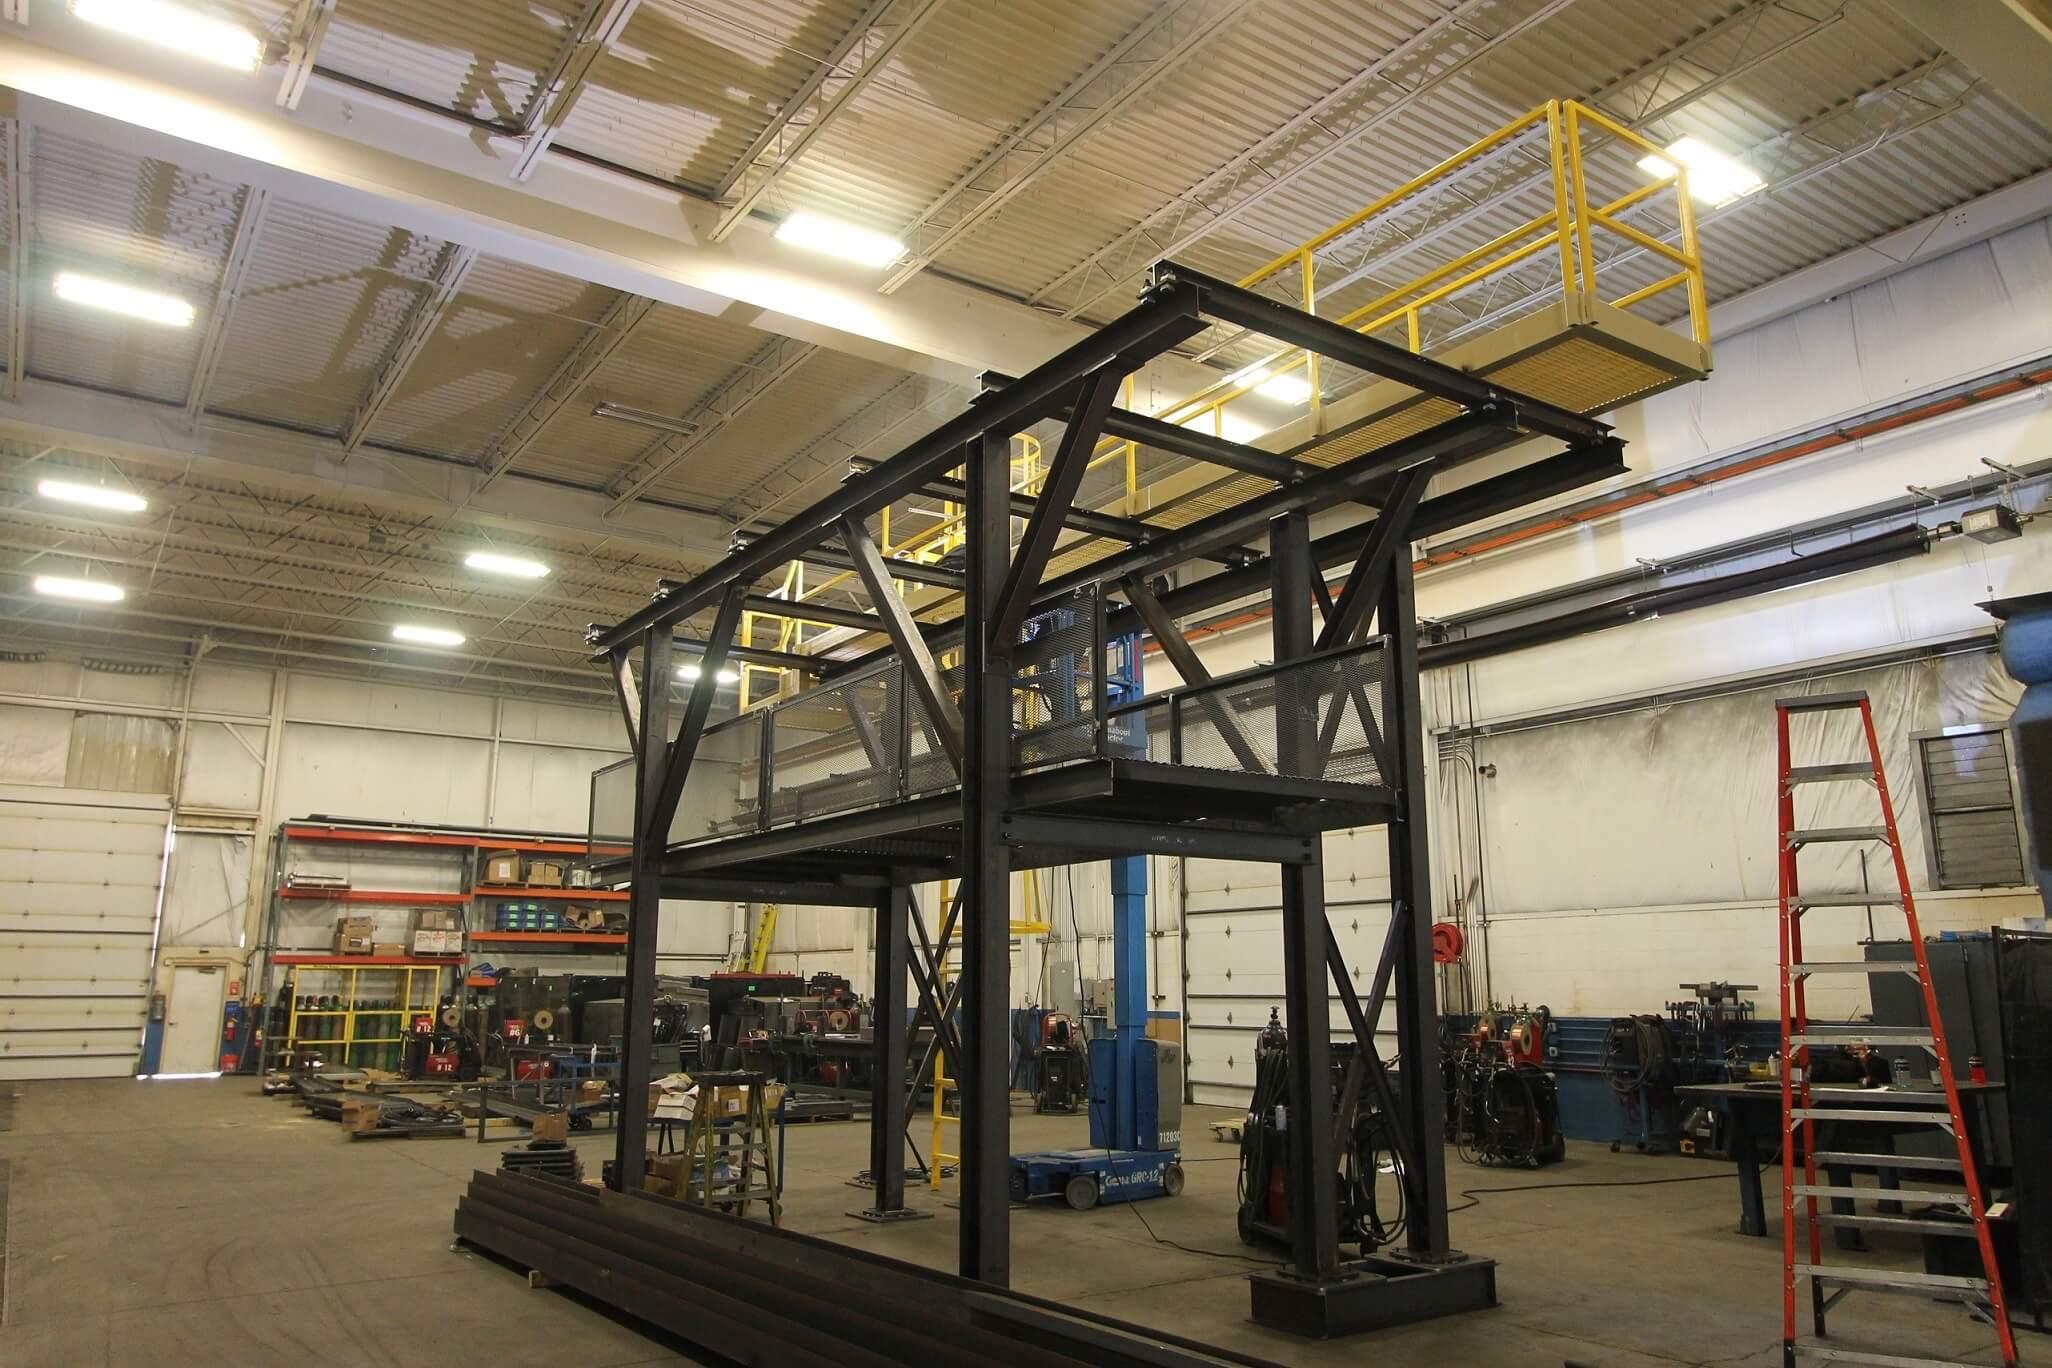 Fabrication process at Lee Contracting